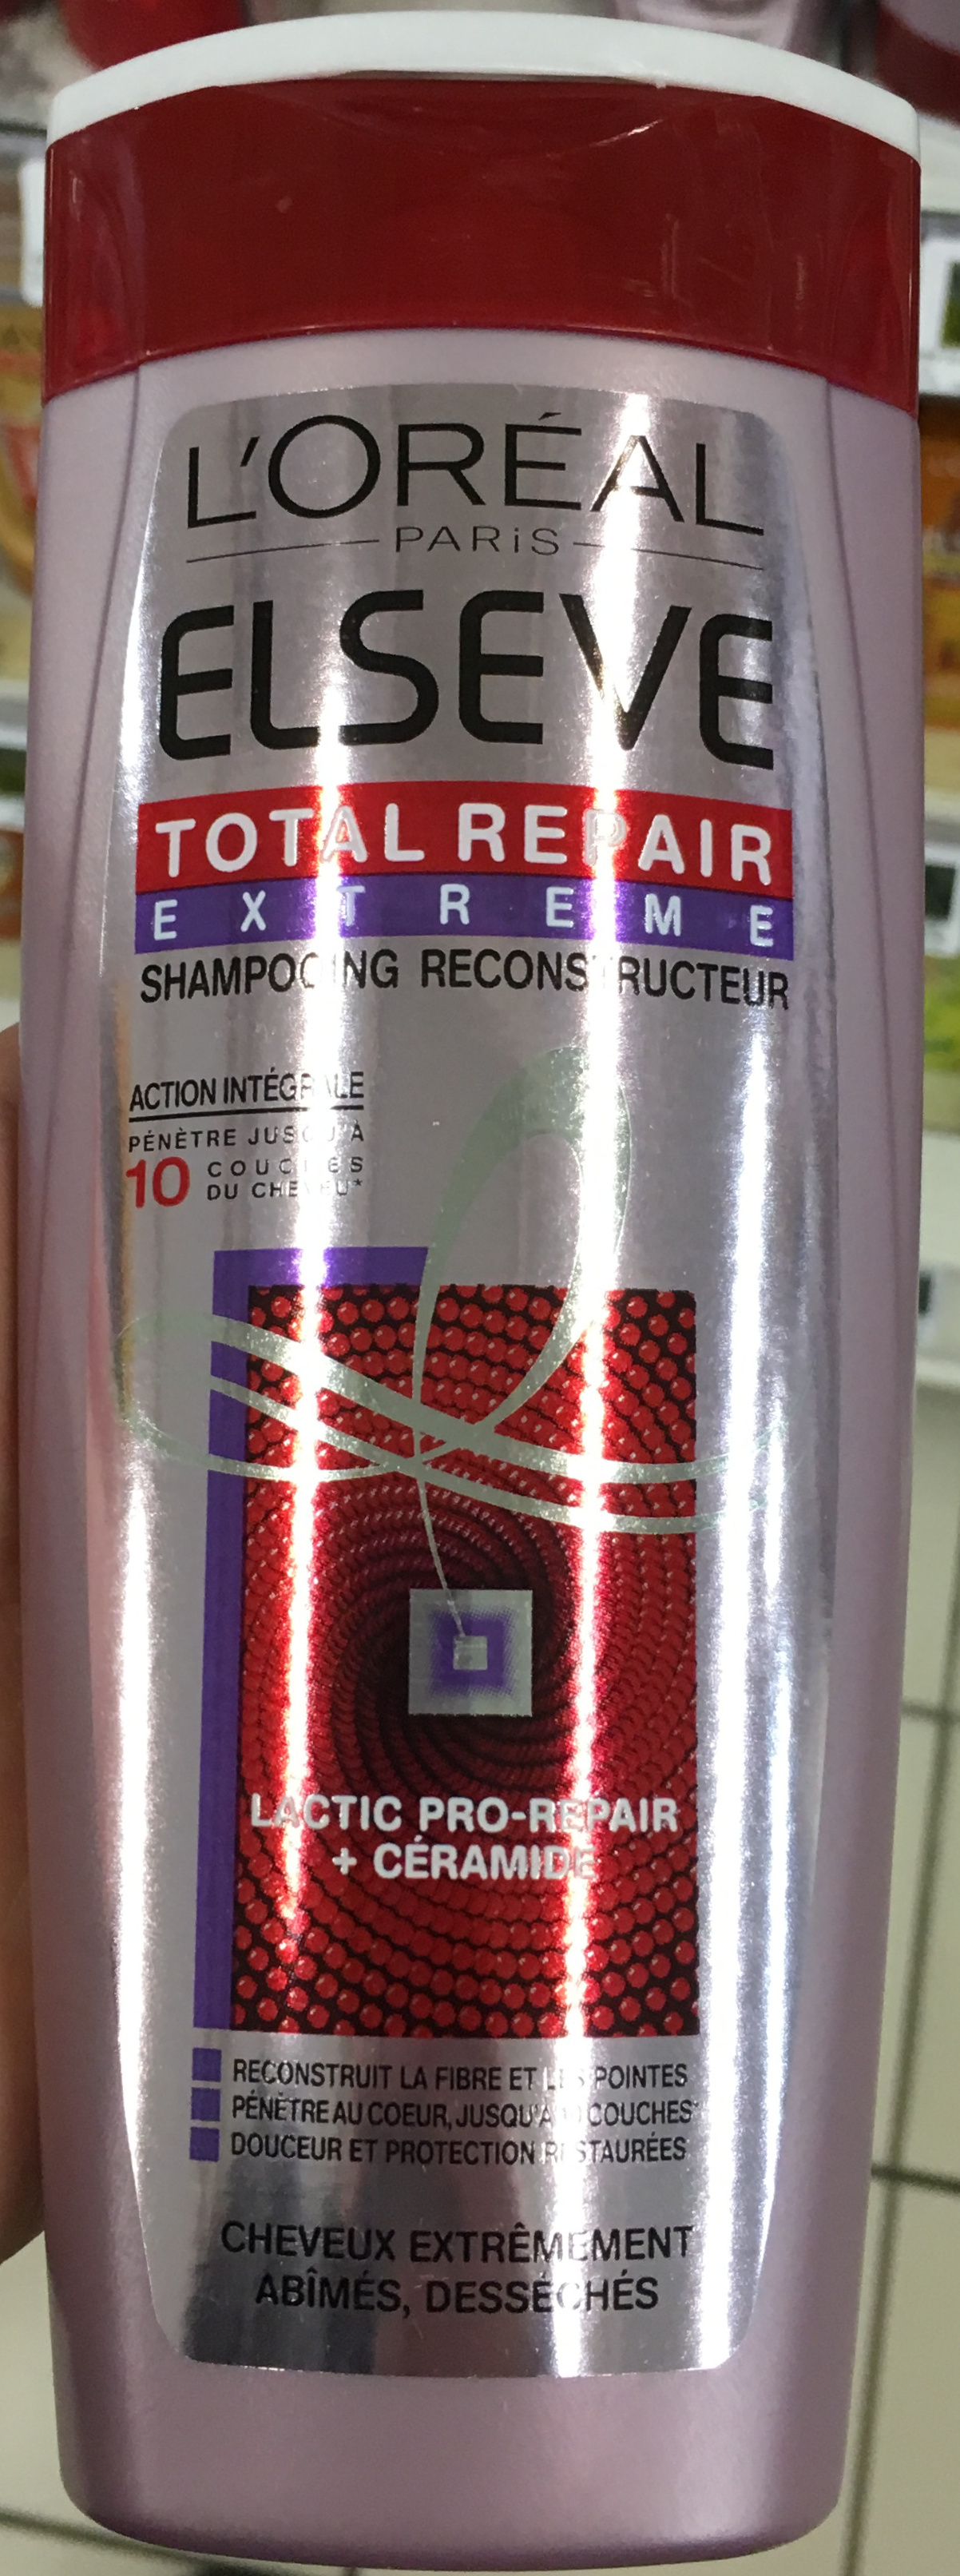 Elseve Total Repair Extreme Shampooing reconstructeur - Product - fr